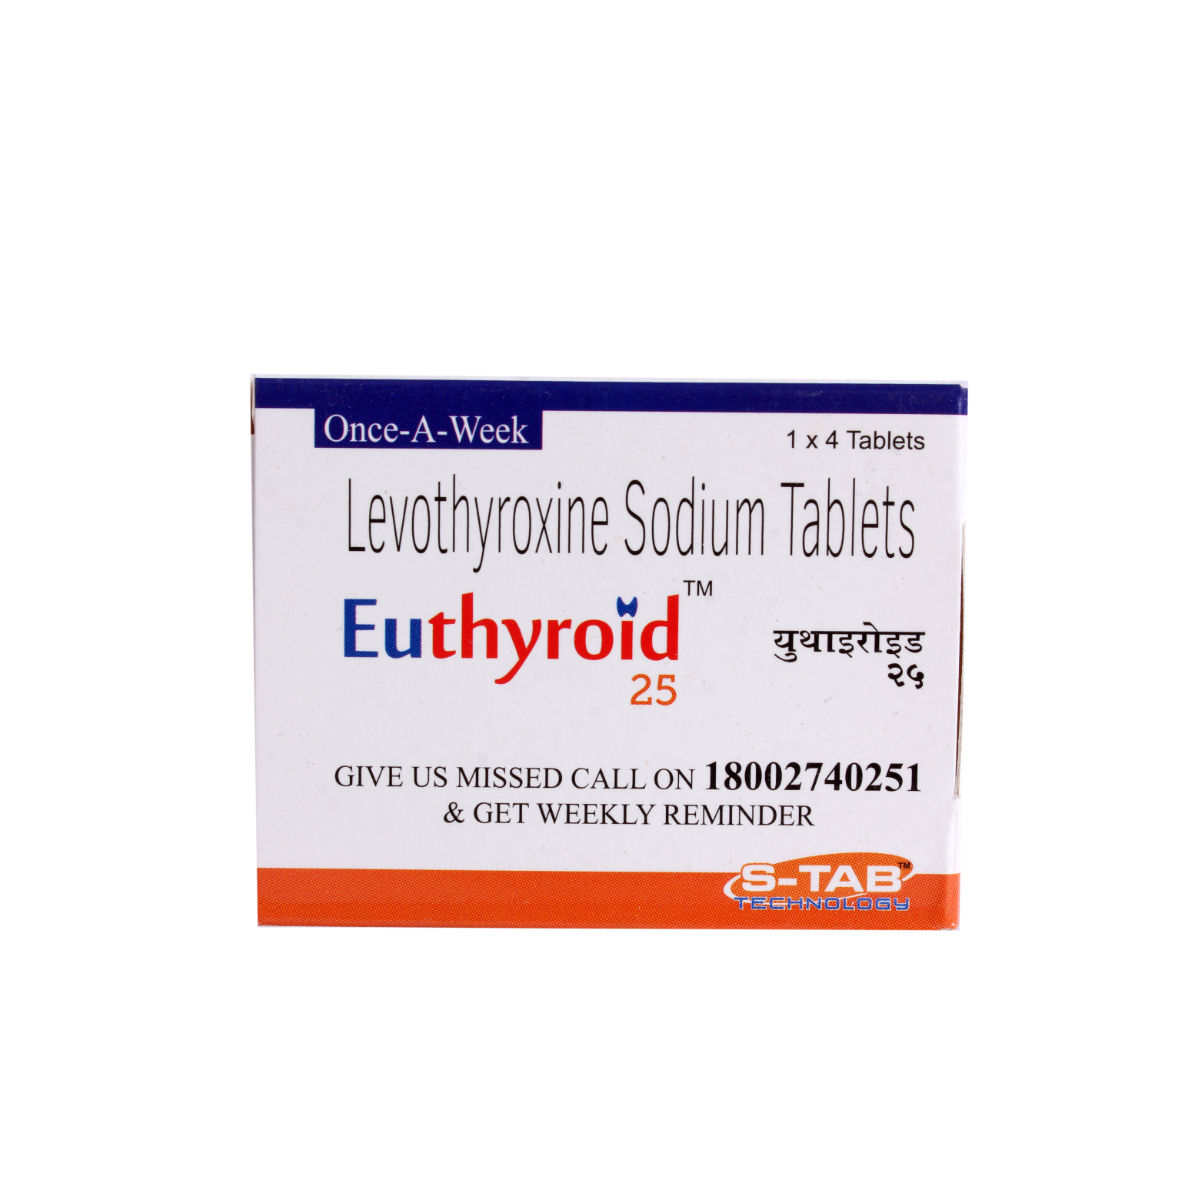 EUTHYROID 25MG TABLET 4'S, Pack of 4 TABLETS